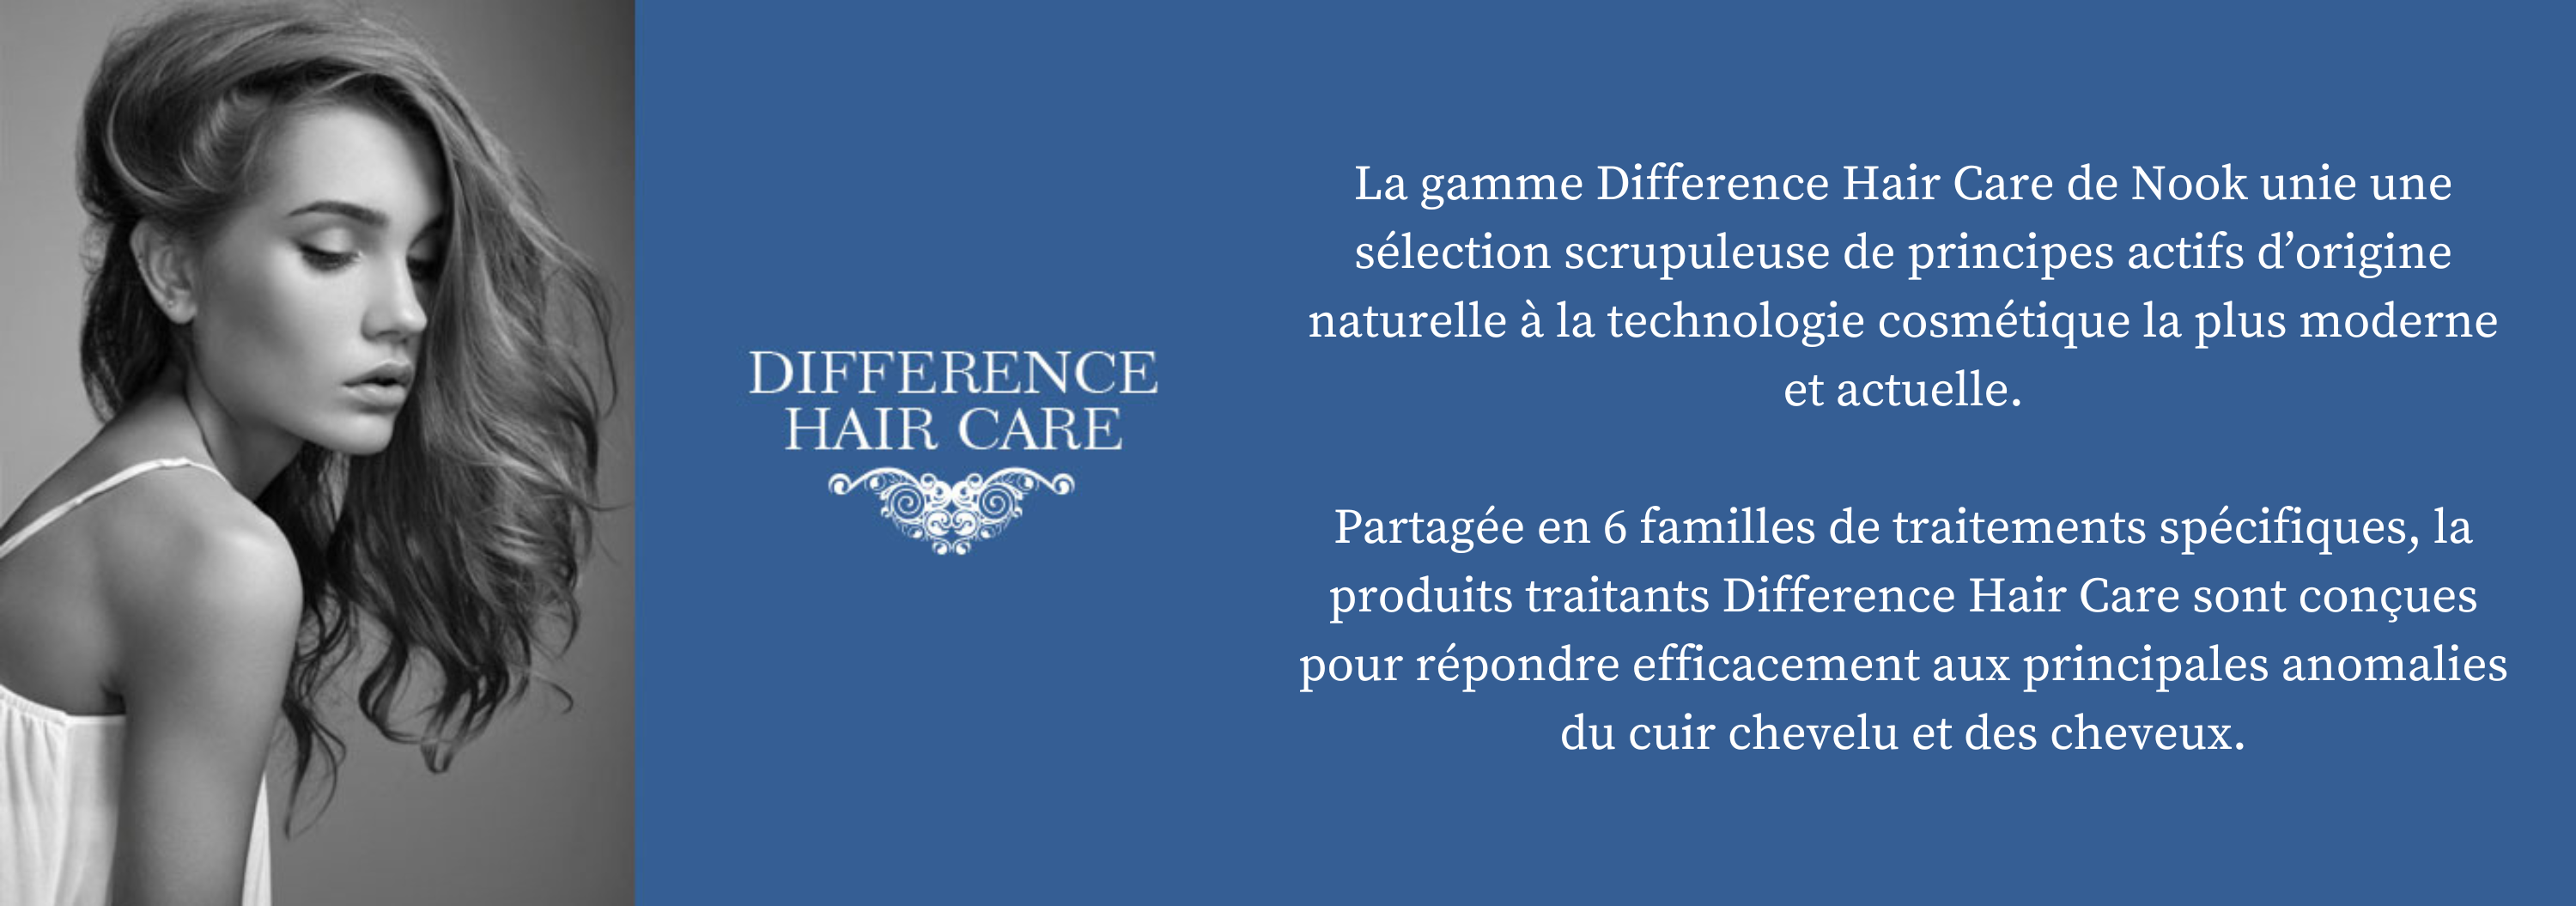 Difference hair care